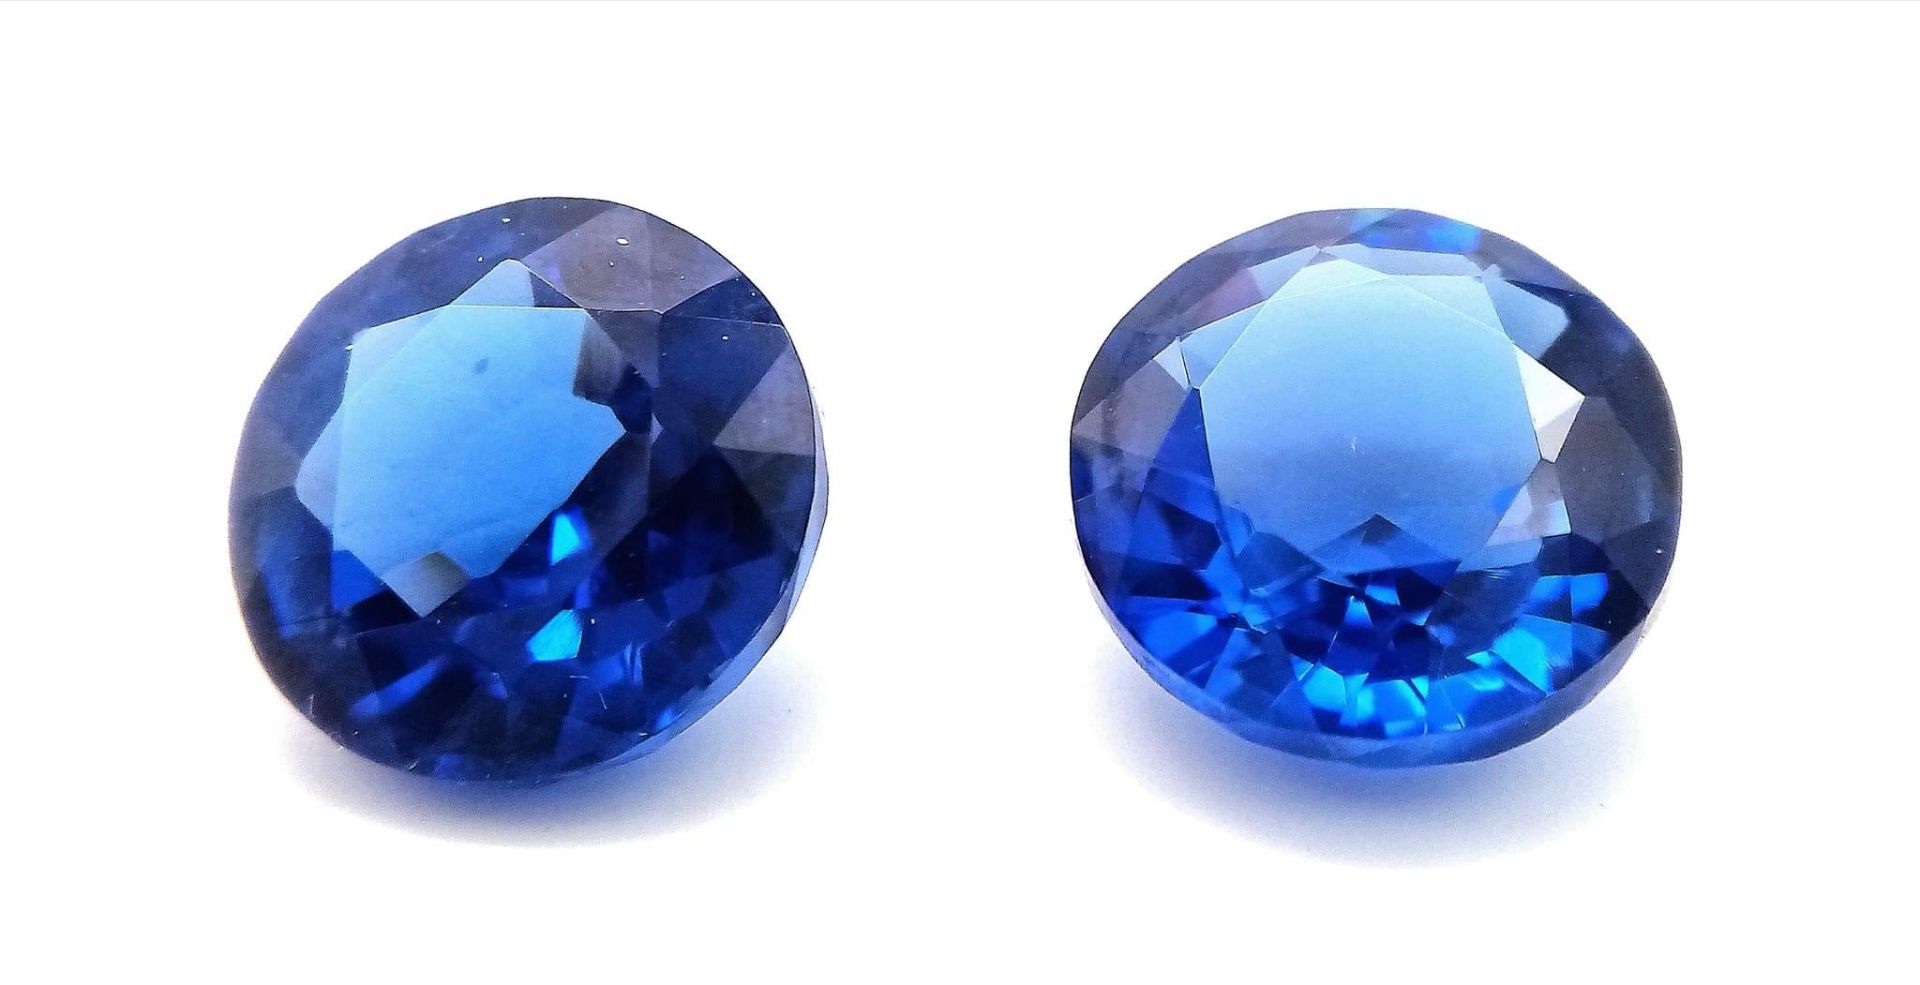 An excellent pair of round cut, dark blue SAPPHIRES. Approximately 10 carats each, with no cracks,